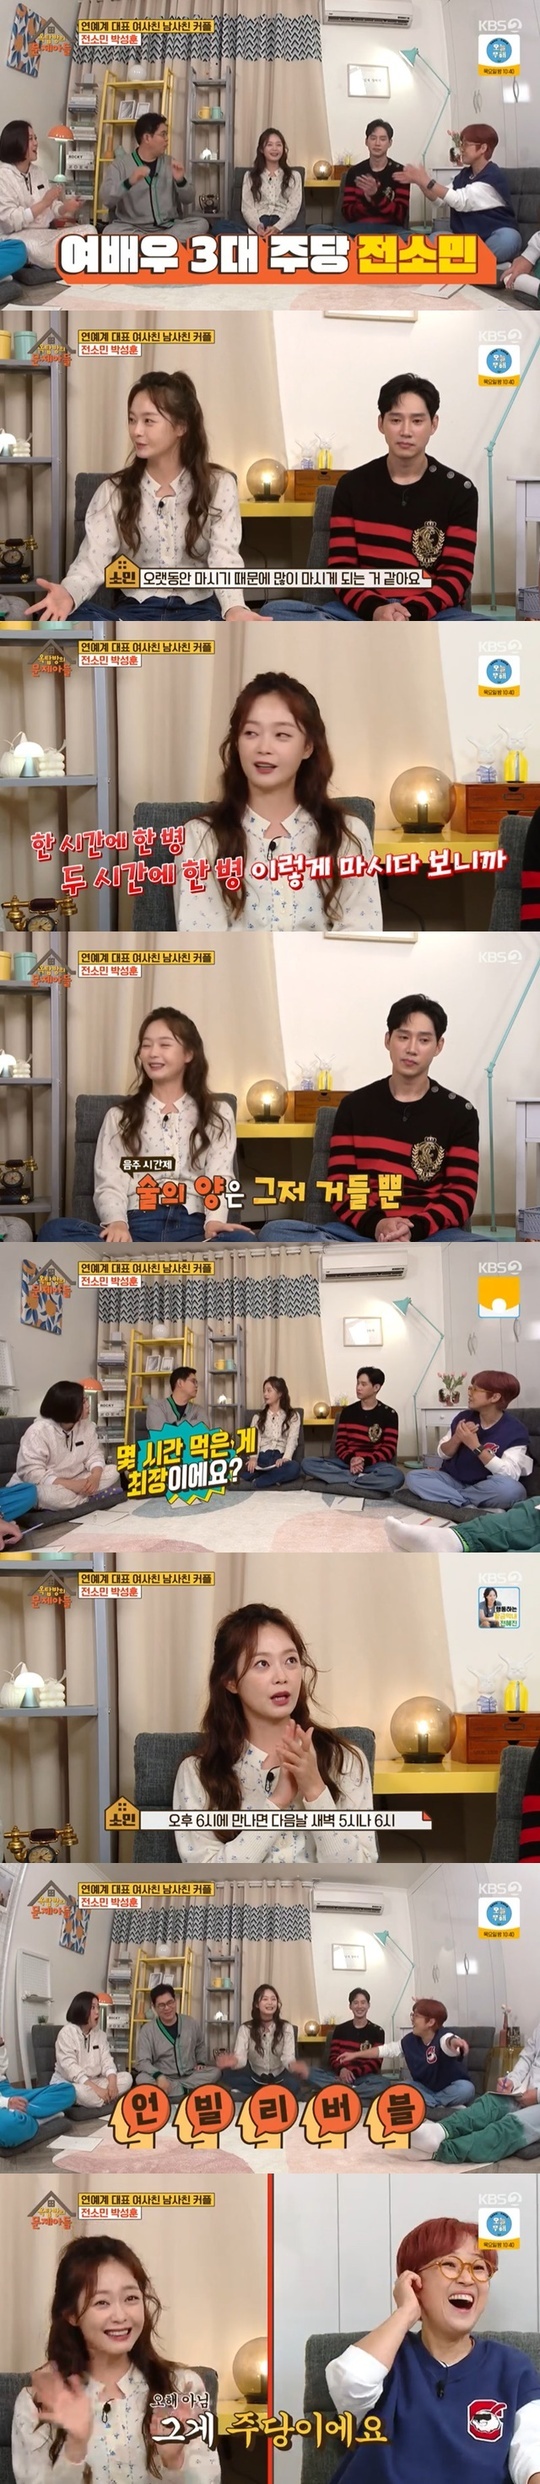 Jeon So-min surprised everyone by revealing the volume of the weekOn KBS 2TV Problem Child in House broadcast on October 19, Jeon So-min and Park Sung-hoon appeared.Kim Sook said, There are three major actors.Kim Hee-sun, So-hyun, and Jeon So-min were among the three major female actors.I drink a lot because I drink a long time, and I drink a bottle per hour, one bottle per hour, two hours, and I do not care about the amount of part-time drinking. When Jin Yongman asked, How long is the longest time? Jeon So-min surprised everyone by saying, Once you meet at 6 pm in the past, it will be 5 am or 6 am the next day.Jung Hyung-don was surprised to say, 11 bottles? 12 bottles? And Jin Yongman admired that this is unlimited.When Song Eun-yi said, I have never drunk, Jeon So-min refuted, Im drunk, but his best friend Park Sung-hoon said, I do not get distracted.Park Sung-hoon also said, I do not drink while measuring sheep. I eat metallurgy slowly.When Song Eun-yi mentioned Running Man Yoo Jae-seok and Ji Seok-jin who do not drink, Jeon So-min said, It is so fun to not drink.I can go out like I ate without drinking. Kim Sook asked about the drinking blunder and Jeon So-min said, There were many trials and errors. I once brought two cell phones with me.The phone rang and I asked why I was taking my cell phone and I said, Its mine. I apologized and turned it around.I thought it was mine because I had a charger at the checkout counter, but it was the employees cell phone. I thought it was a drunken prank call and hung up.When Song Eun-yi asked if it had been since his debut, Jeon So-min apologized, I am so sorry.Park Sung-hoon said, Its been a recent occurrence, but my friend moved in last month. I went to play and had a lot of alcohol.I took Taxi, and when I had the car, I called the surrogate, so I called the surrogate. Wheres my car?I should have called Taxi, but I said I was really sorry.